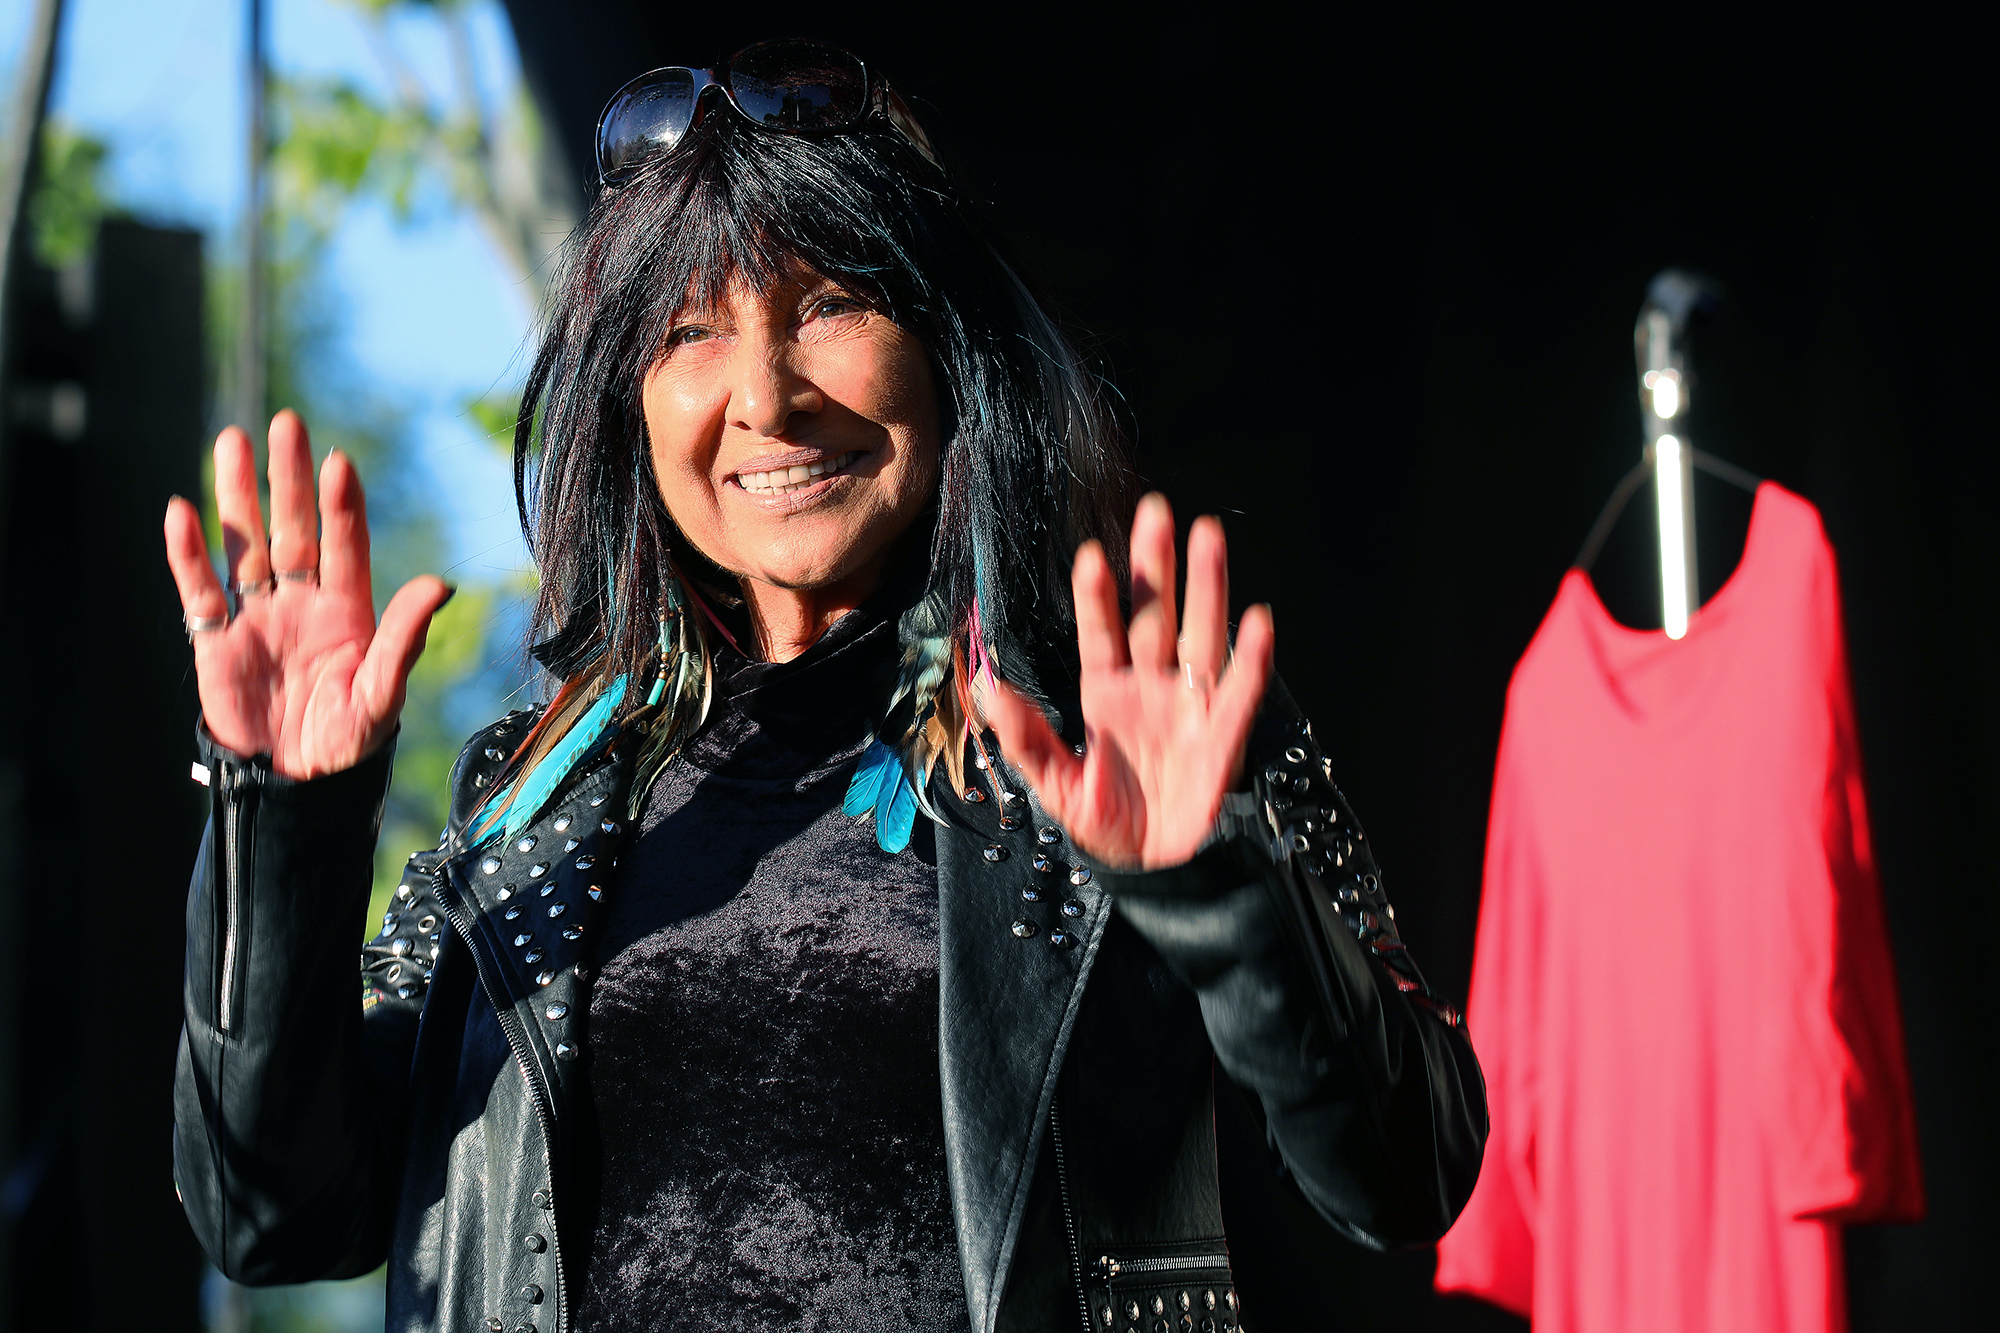 Who is the real Buffy Sainte-Marie?